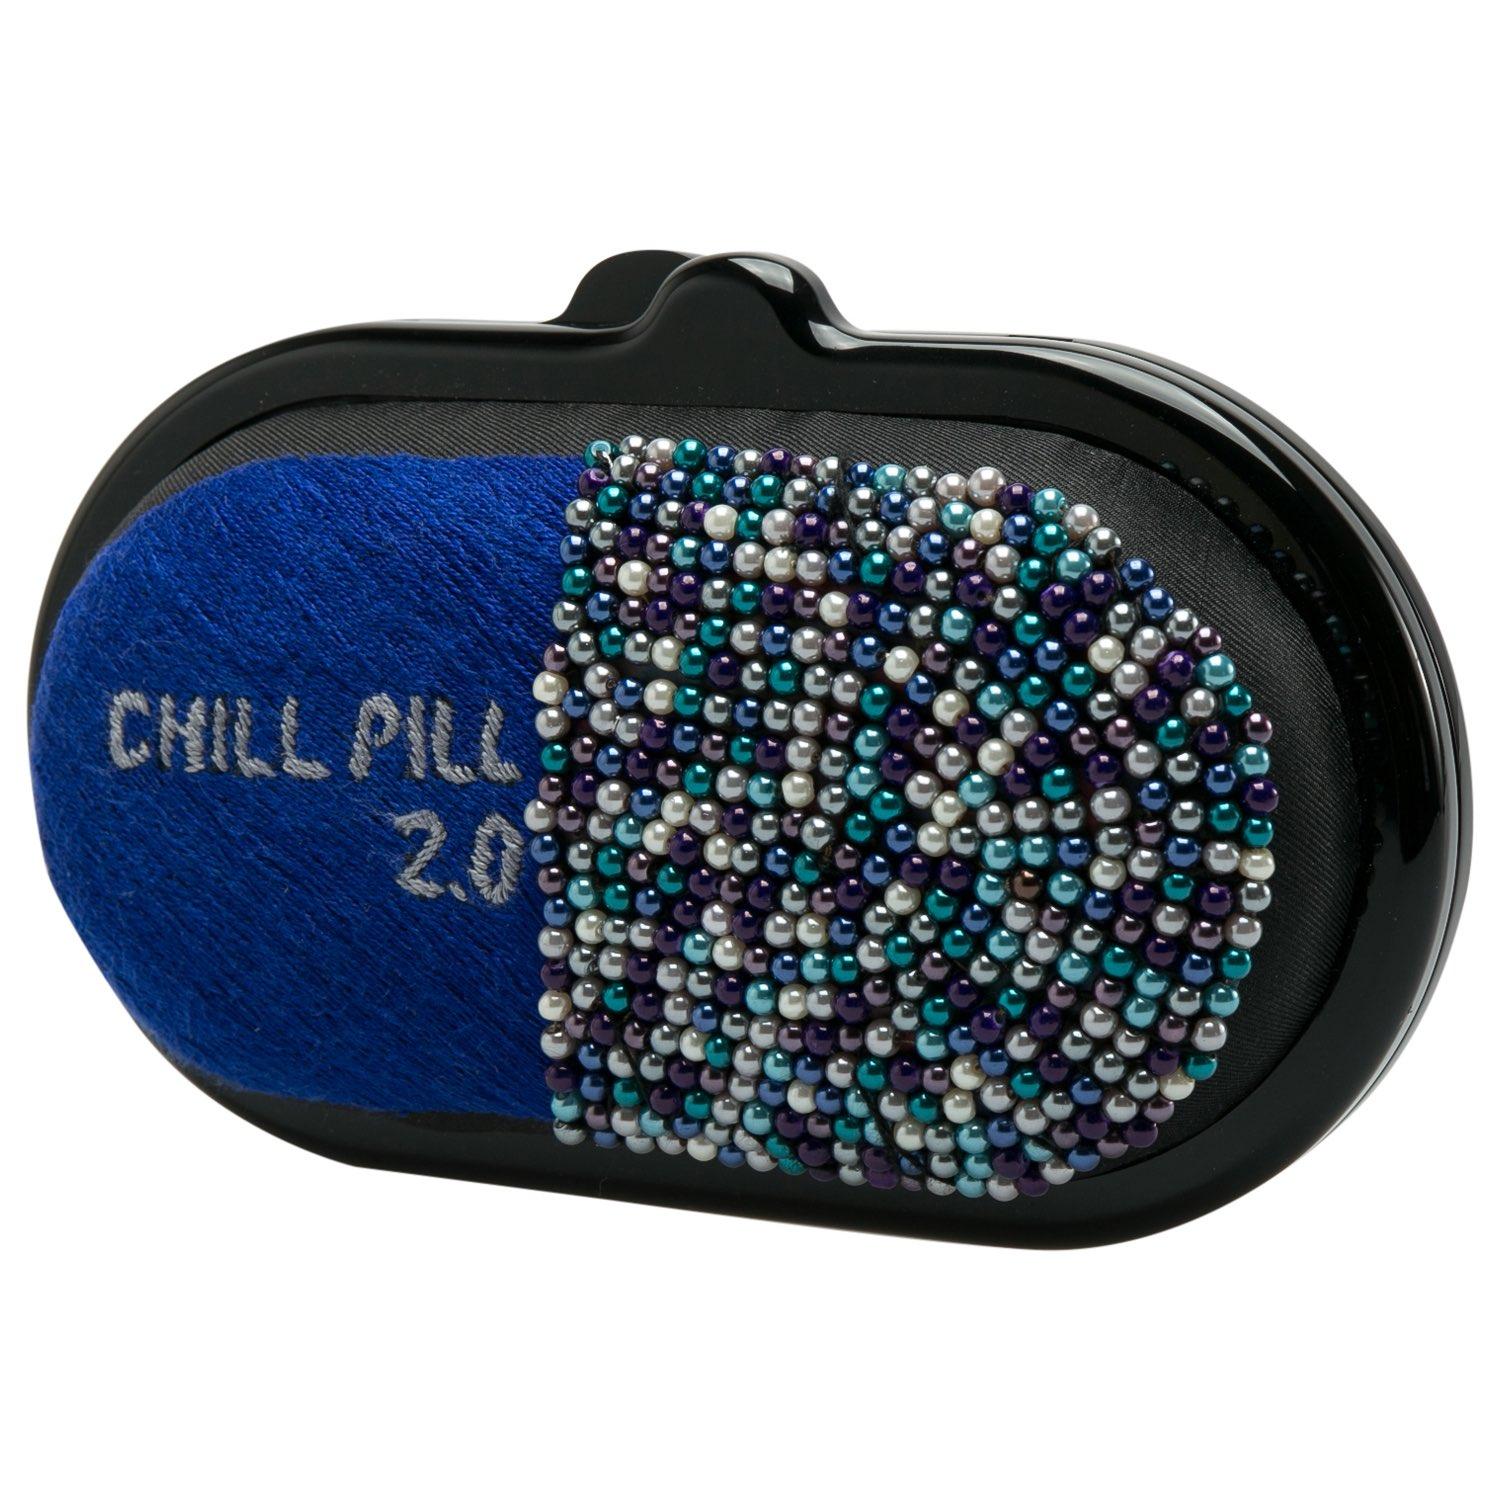 Black Sarah's Bag Blue/Multicolor Beaded Fabric Chill Pill 2.0 Chain Clutch